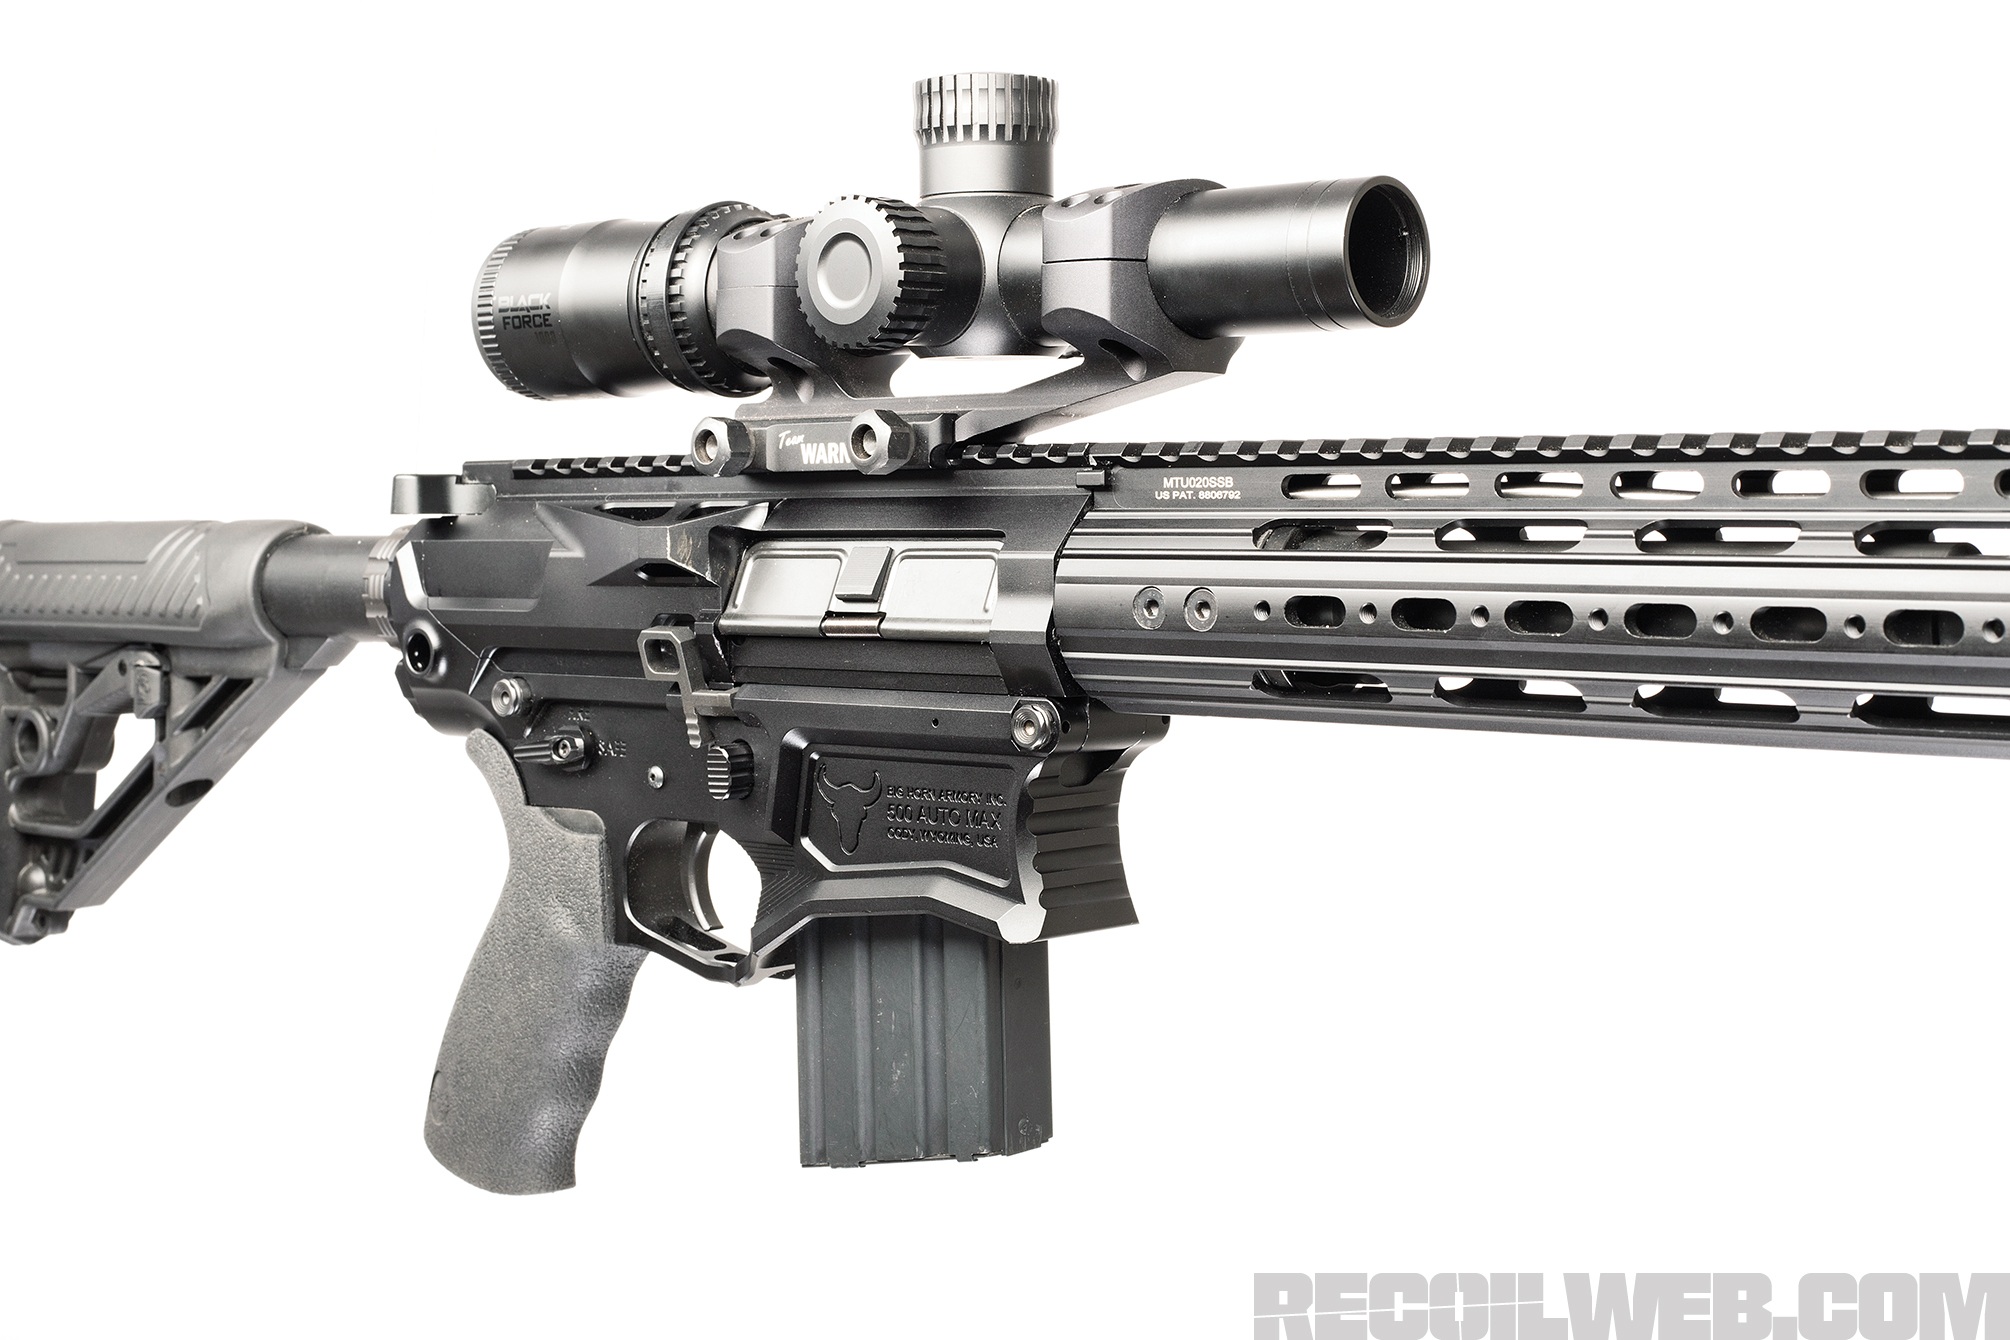 500 Auto Max: Big Horn Armory's Rifle Reviewed